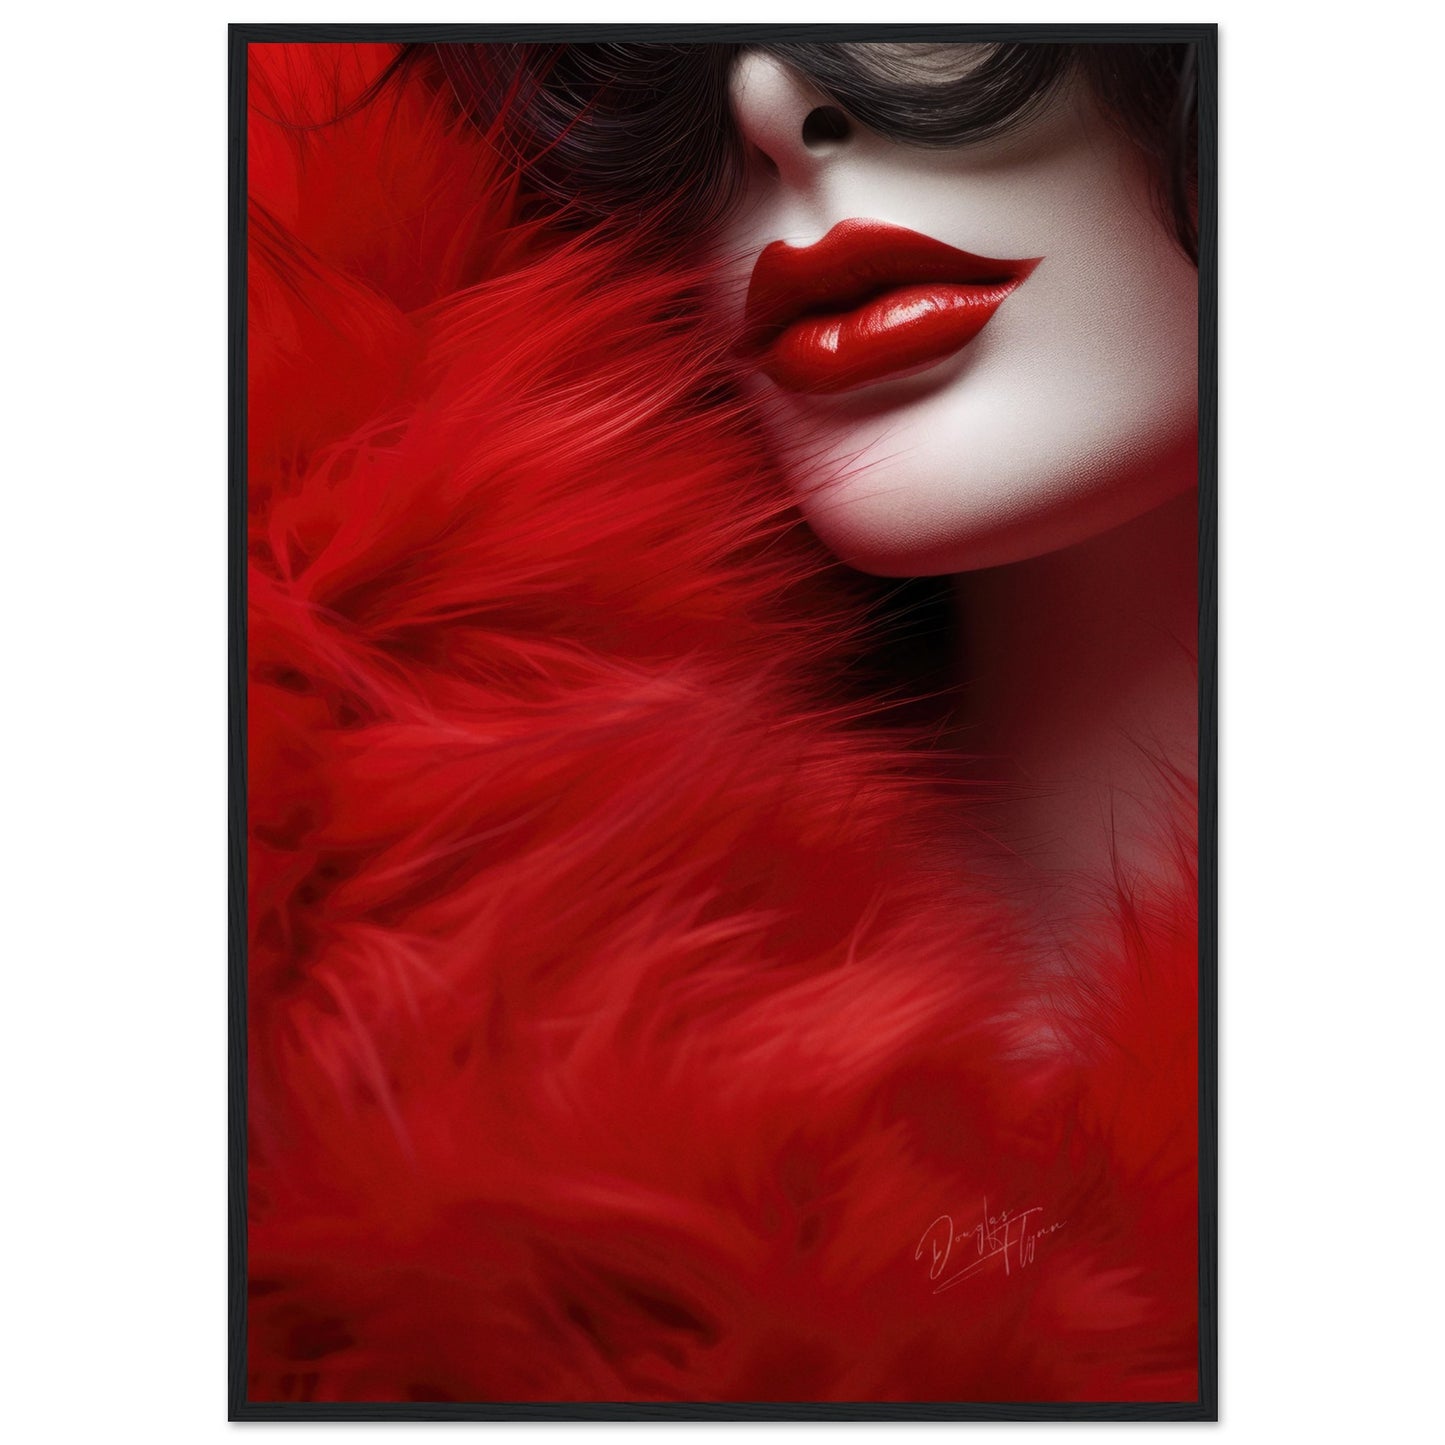 »Girl With Red Fur 1«